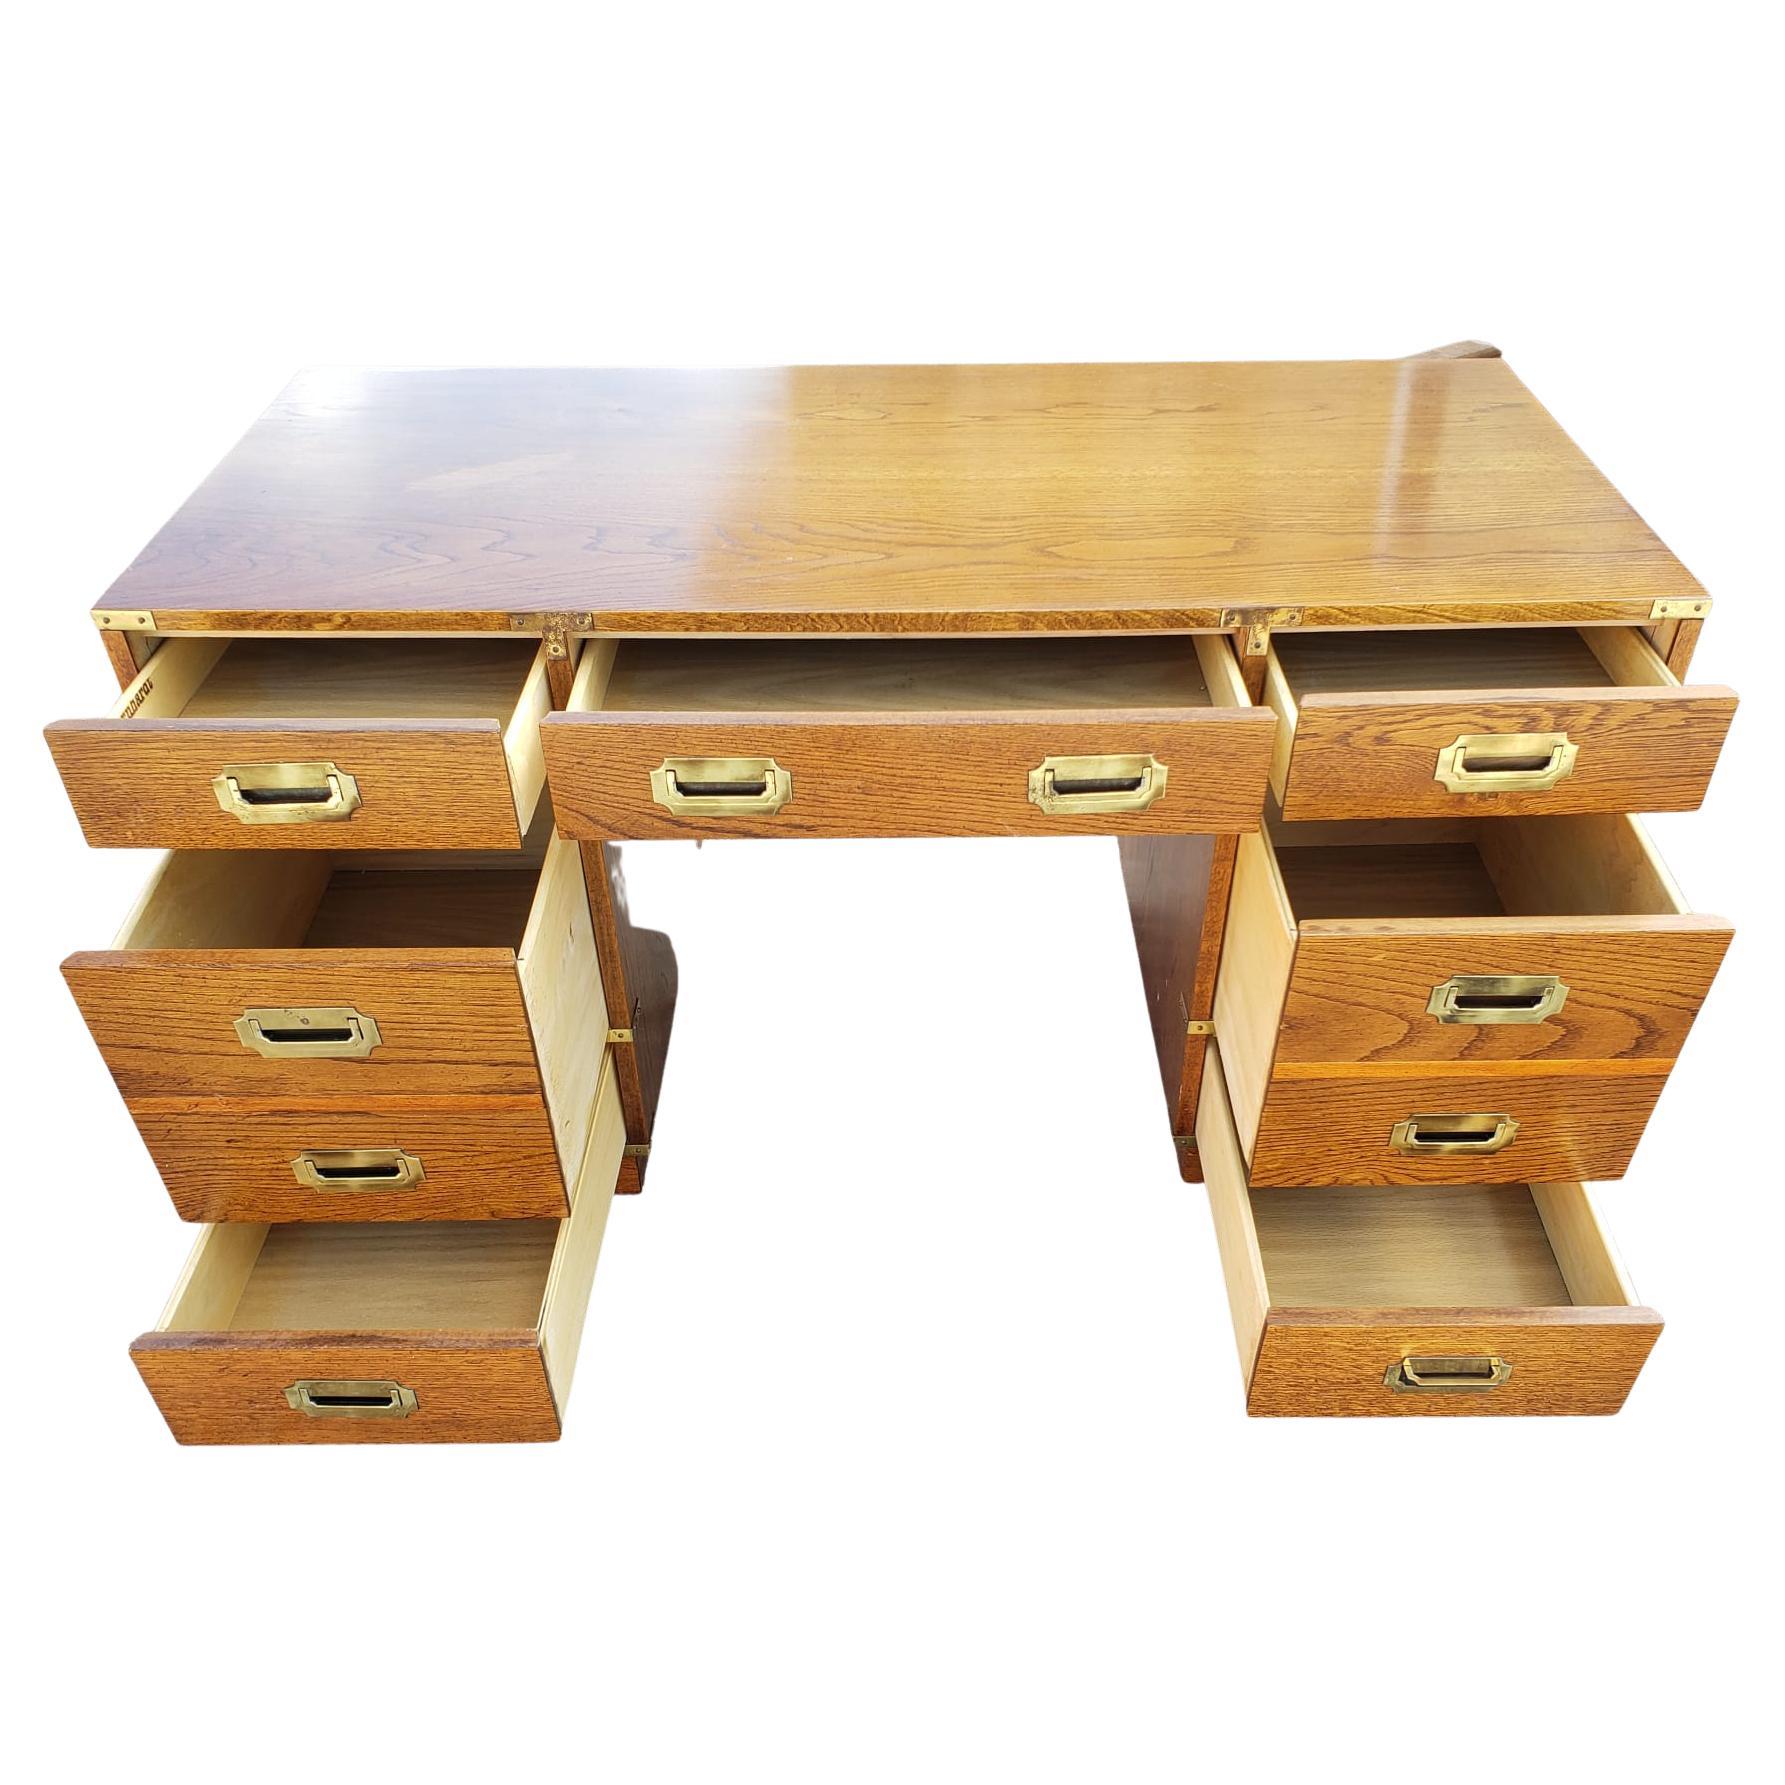 Bernhardt Vintage Campaign oak partners desk with pleaty of storage and filing cabinets. 
Measures 54'W X 24